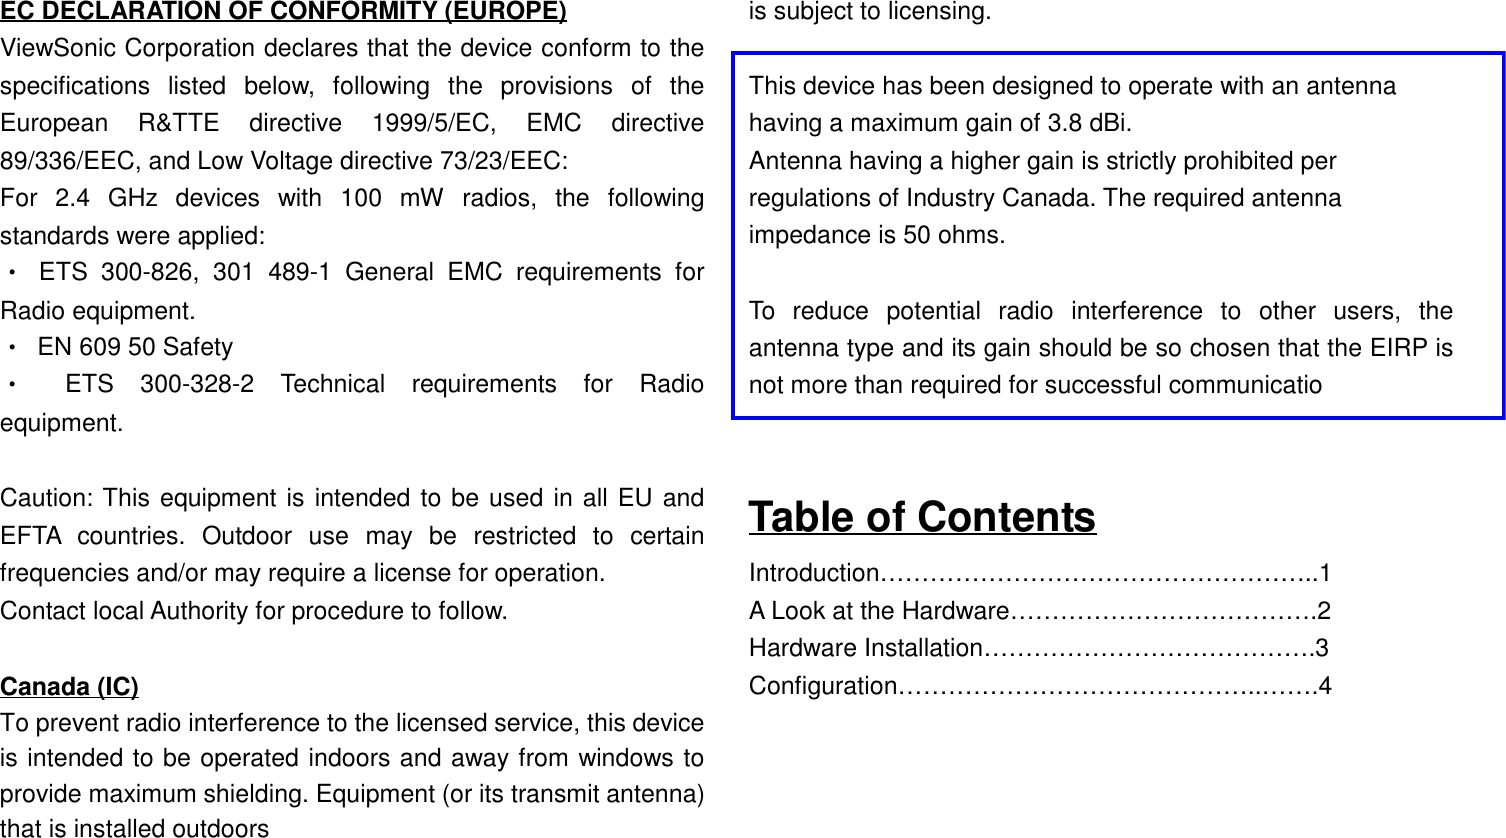 EC DECLARATION OF CONFORMITY (EUROPE)ViewSonic Corporation declares that the device conform to thespecifications listed below, following the provisions of theEuropean R&amp;TTE directive 1999/5/EC, EMC directive89/336/EEC, and Low Voltage directive 73/23/EEC:For 2.4 GHz devices with 100 mW radios, the followingstandards were applied:• ETS 300-826, 301 489-1 General EMC requirements forRadio equipment.•  EN 609 50 Safety• ETS 300-328-2 Technical requirements for Radioequipment.Caution: This equipment is intended to be used in all EU andEFTA countries. Outdoor use may be restricted to certainfrequencies and/or may require a license for operation.Contact local Authority for procedure to follow.Canada (IC)To prevent radio interference to the licensed service, this deviceis intended to be operated indoors and away from windows toprovide maximum shielding. Equipment (or its transmit antenna)that is installed outdoorsis subject to licensing.This device has been designed to operate with an antennahaving a maximum gain of 3.8 dBi.Antenna having a higher gain is strictly prohibited perregulations of Industry Canada. The required antennaimpedance is 50 ohms. To reduce potential radio interference to other users, theantenna type and its gain should be so chosen that the EIRP isnot more than required for successful communicatioTable of ContentsIntroduction……………………………………………..1A Look at the Hardware……………………………….2Hardware Installation………………………………….3Configuration……………………………………..…….4